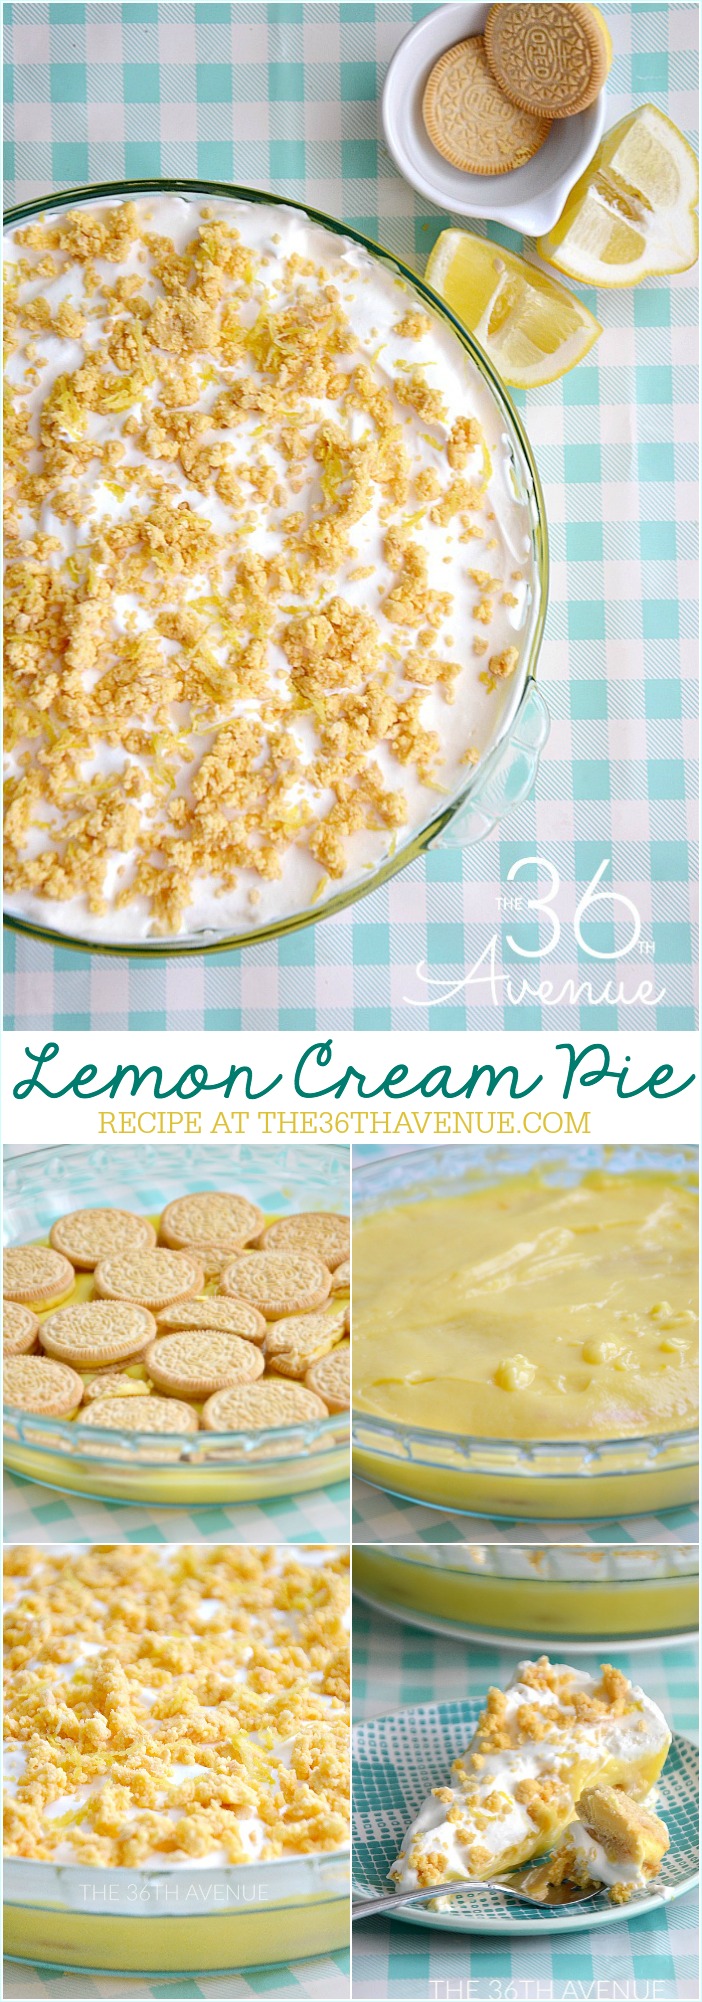 Dessert Recipe - This Lemon Cream Pie is a delicious and easy dessert recipe that your entire family is going to love.